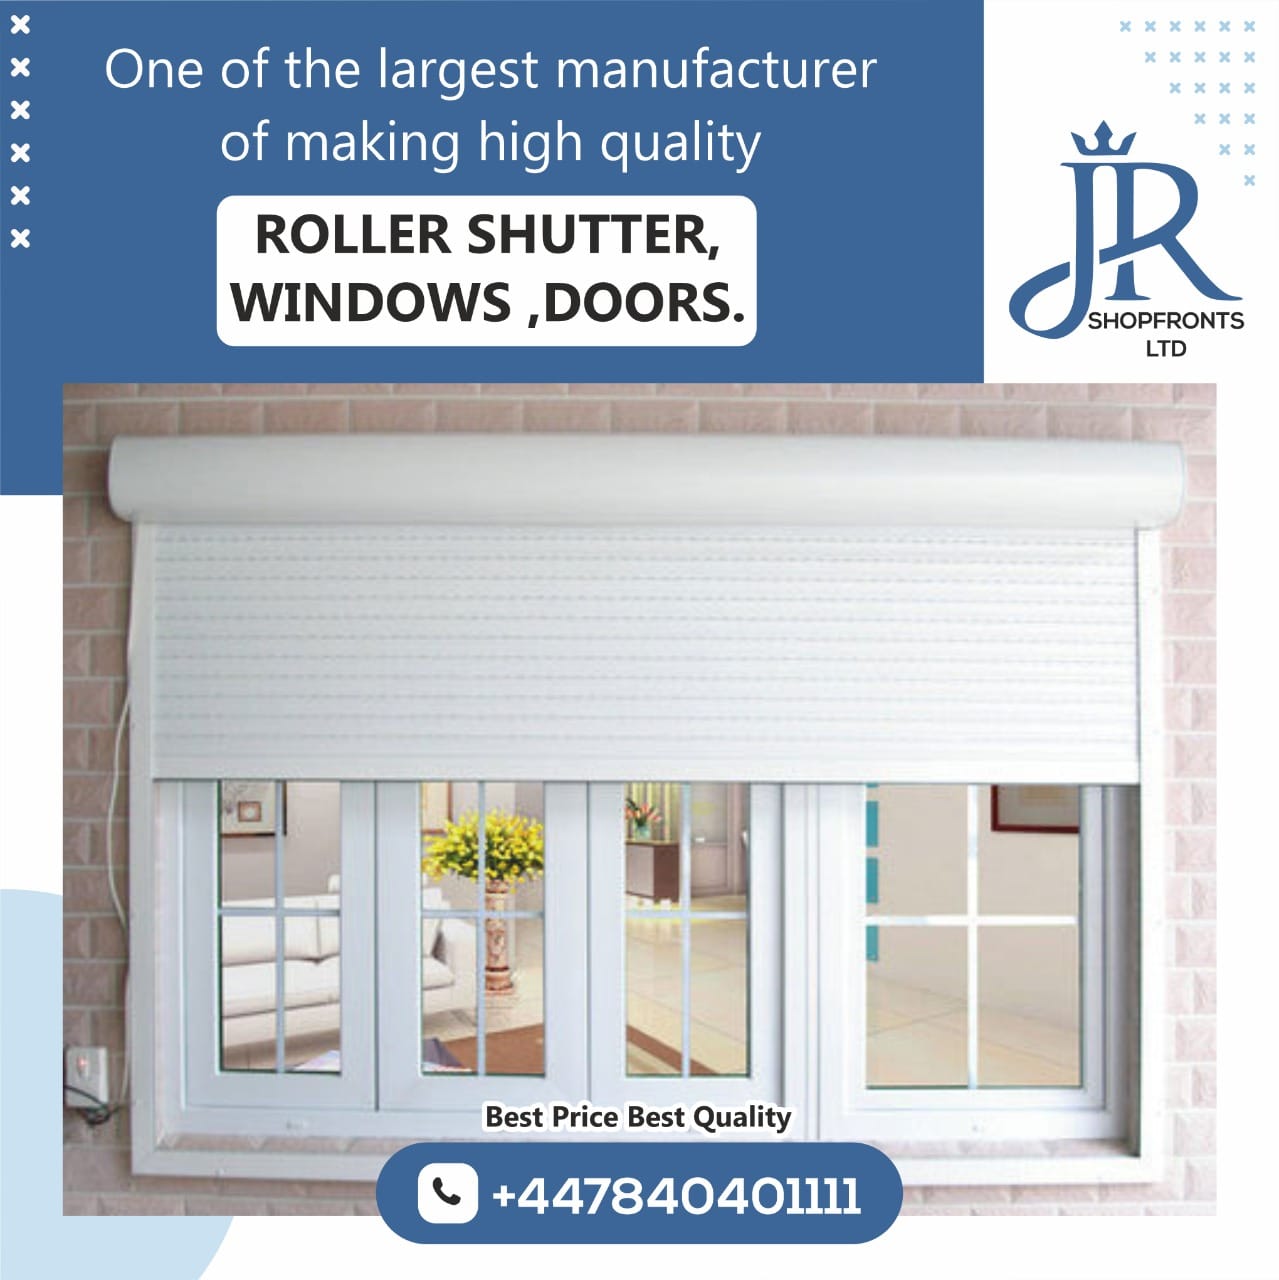 Shutter Company In Workington, shutter complany in Workington, doors manufactuers in Workington, shutters manufacturers in Workington, roller shutters manufacturers in Workington, doors manufacturers in Workington, Shutter Company In Workington